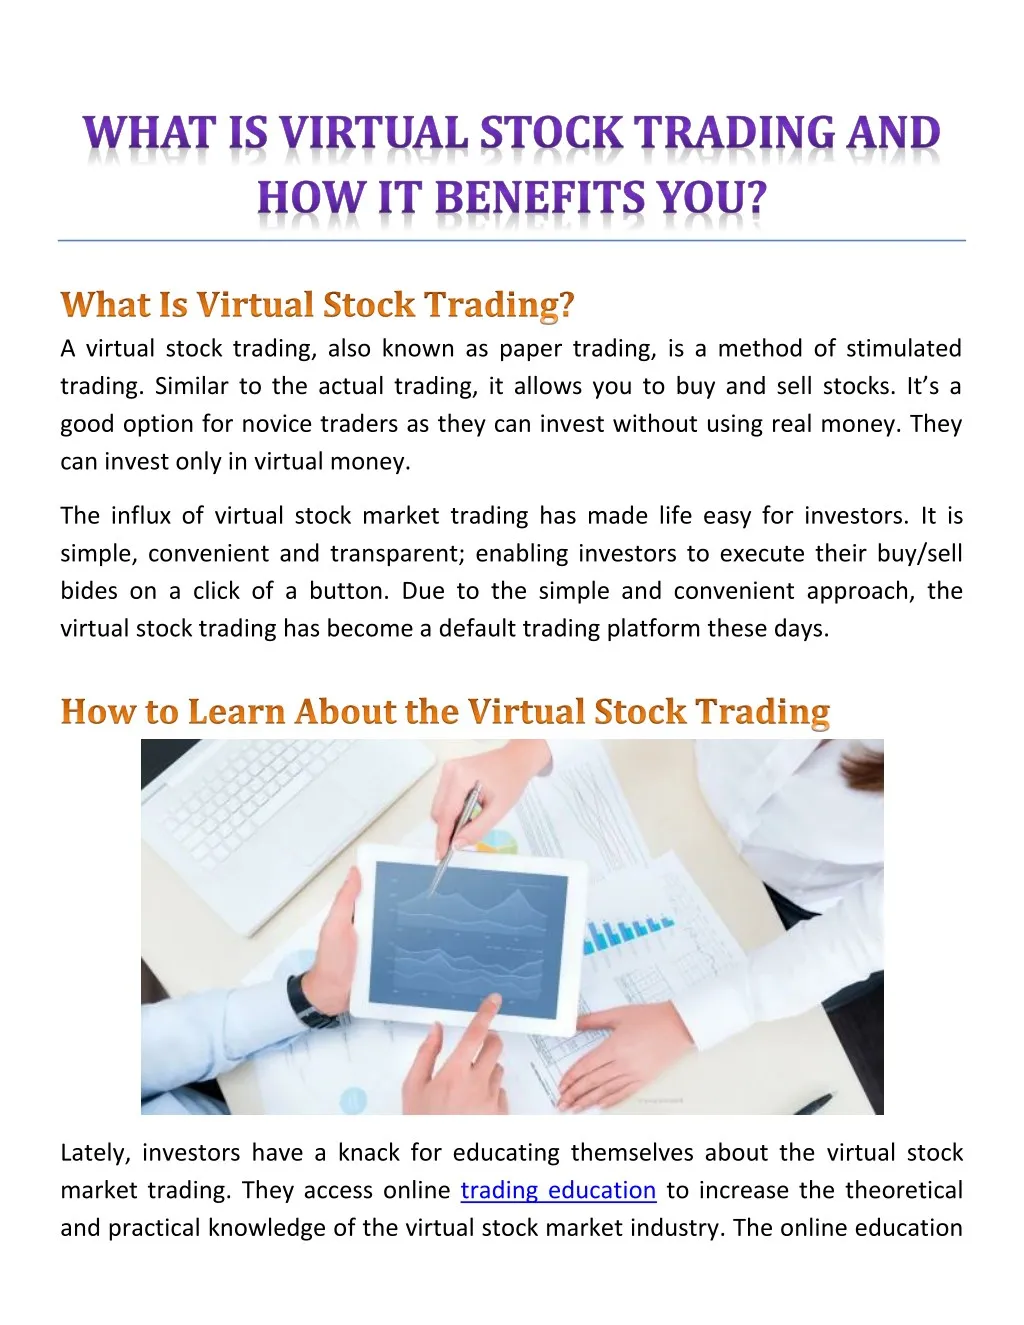 a virtual stock trading also known as paper